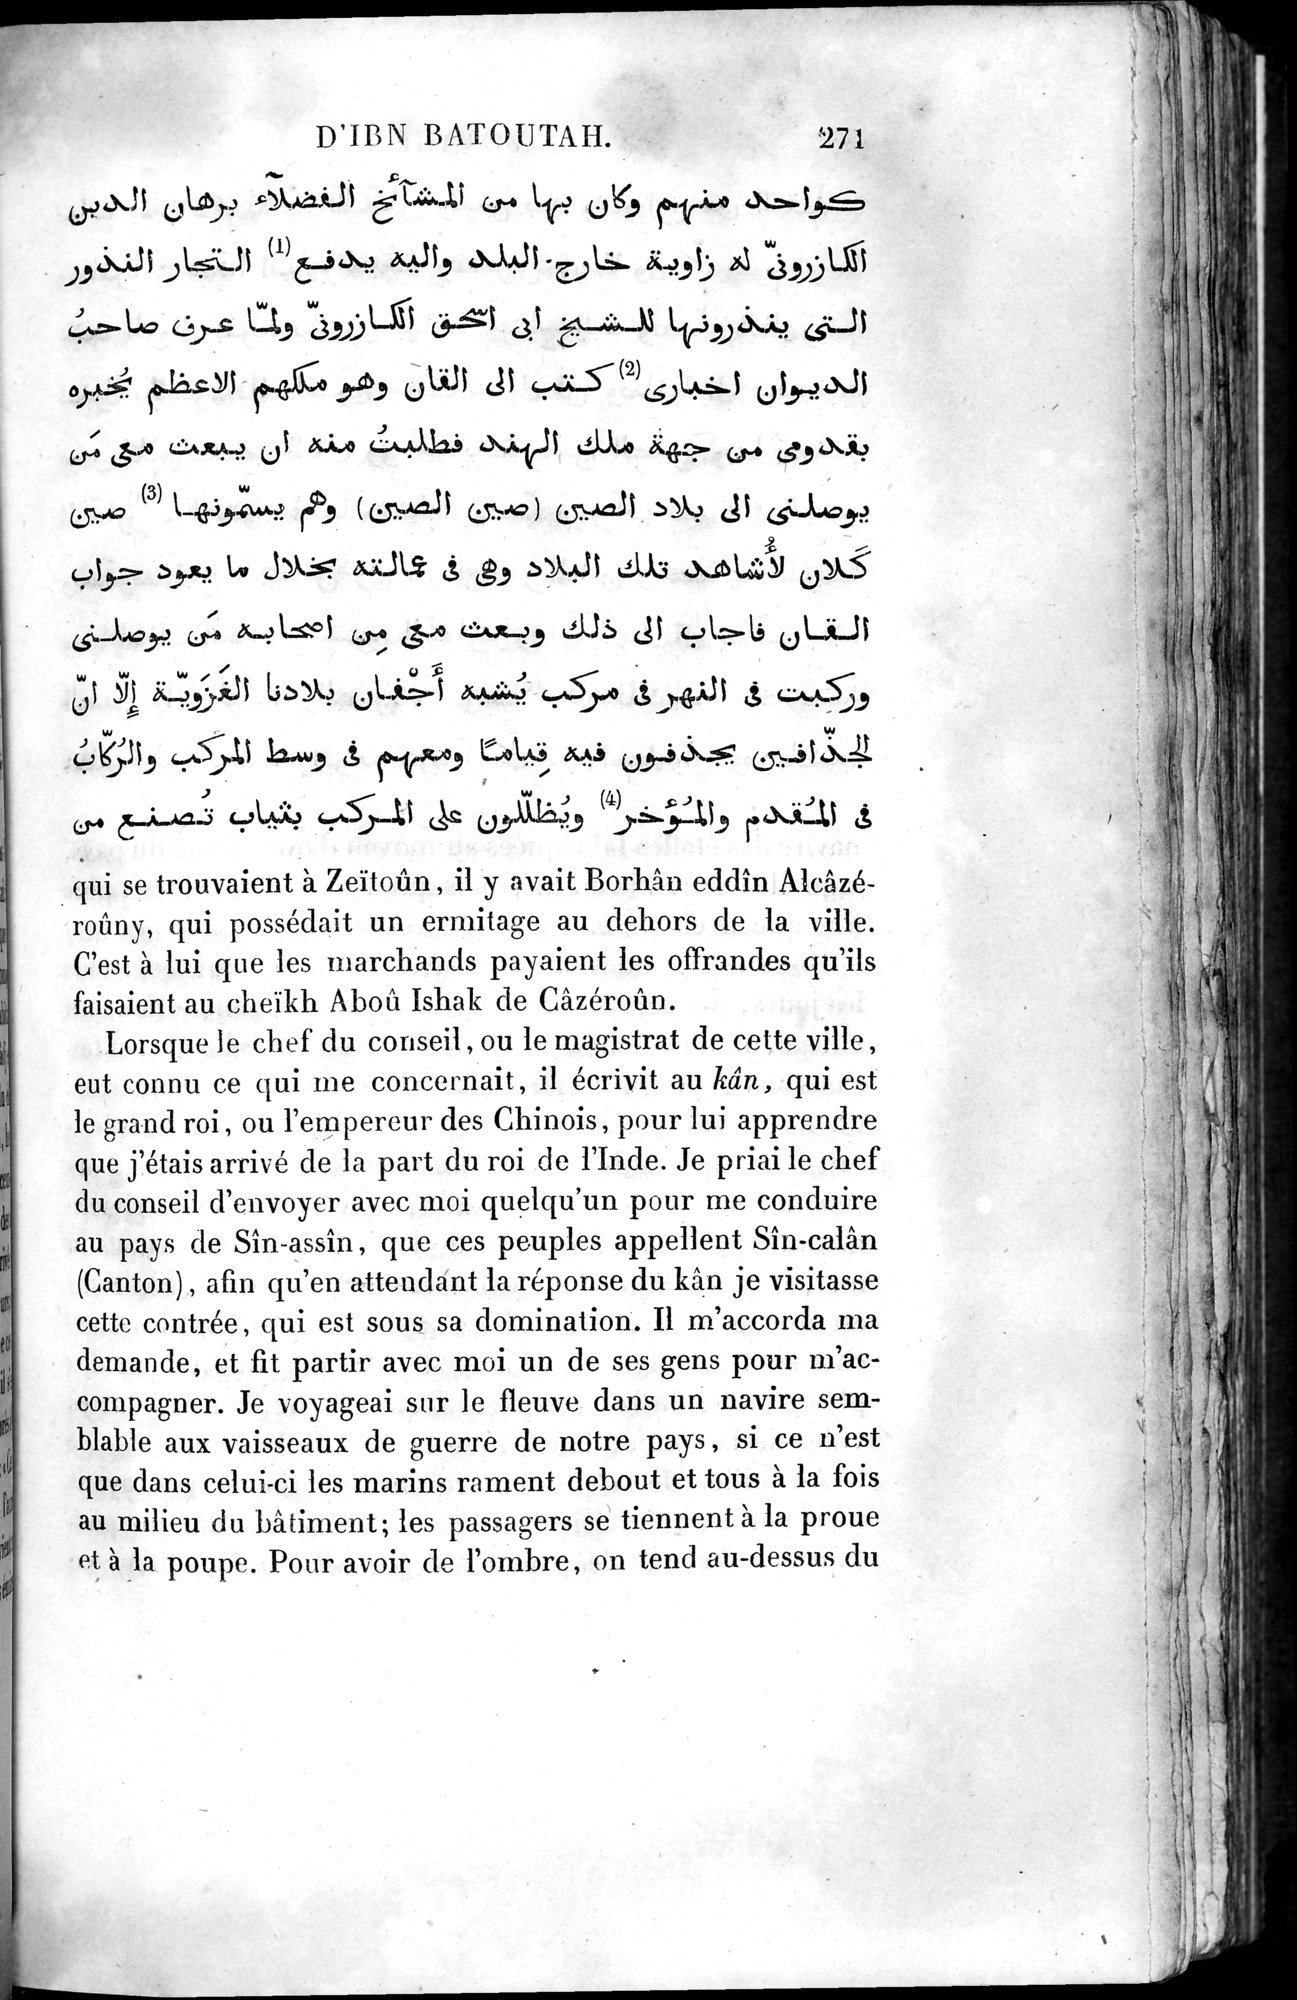 Voyages d'Ibn Batoutah : vol.4 / Page 283 (Grayscale High Resolution Image)